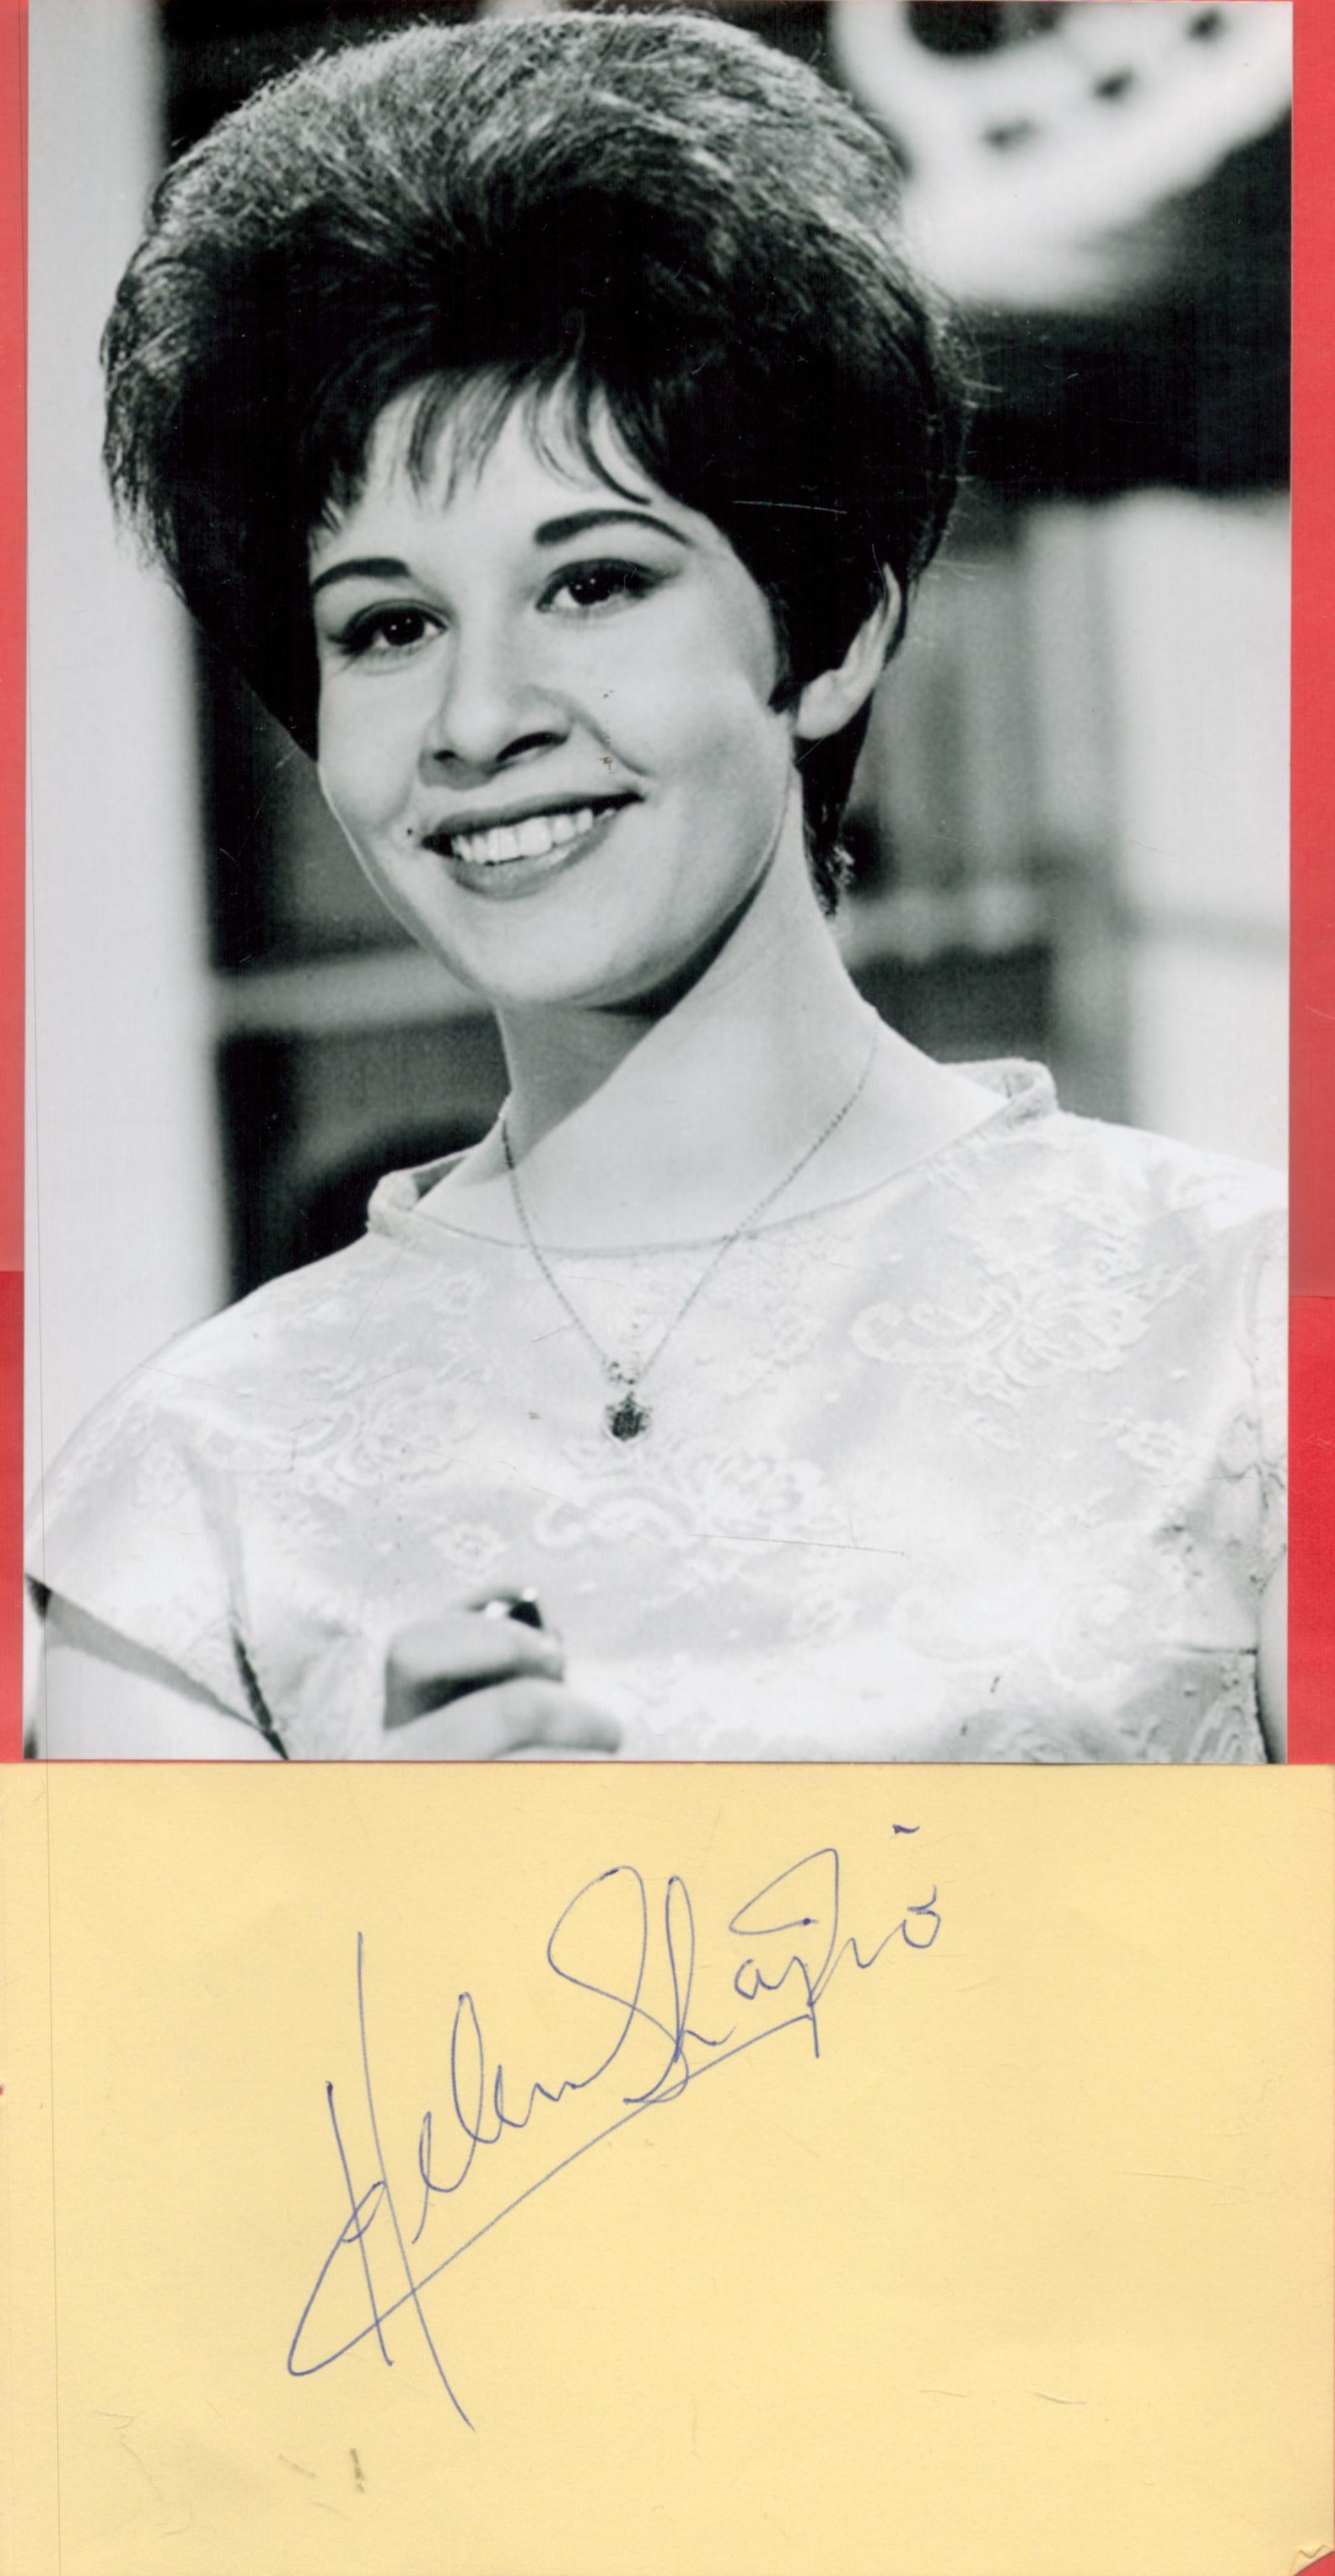 HELEN SHAPIRO Singer signed Album Page with Photo. Good condition. All autographs come with a